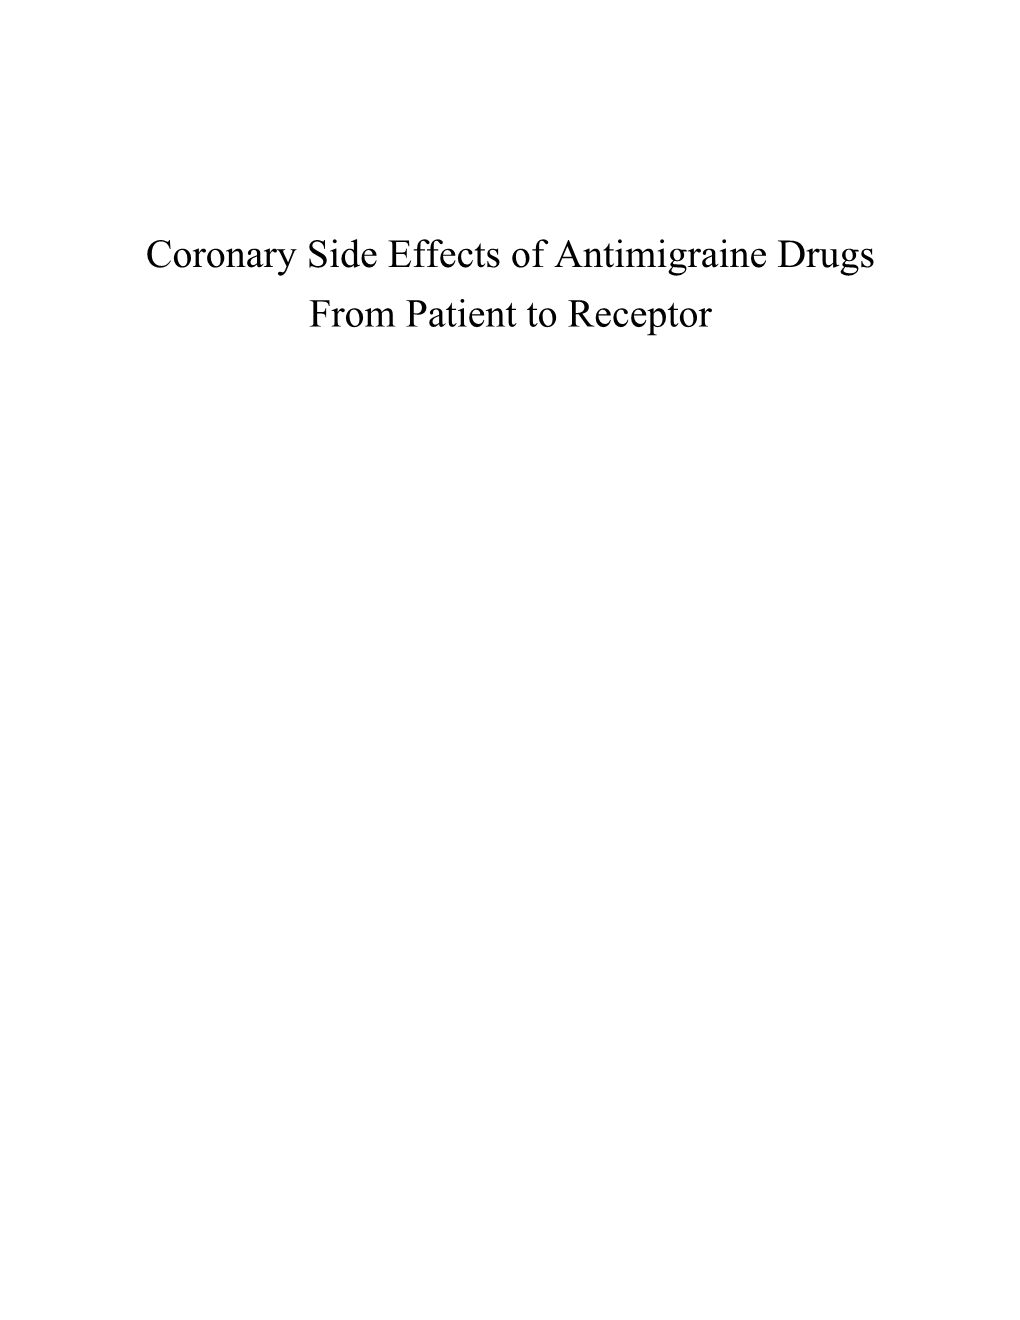 Coronary Side Effects of Antimigraine Drugs from Patient to Receptor